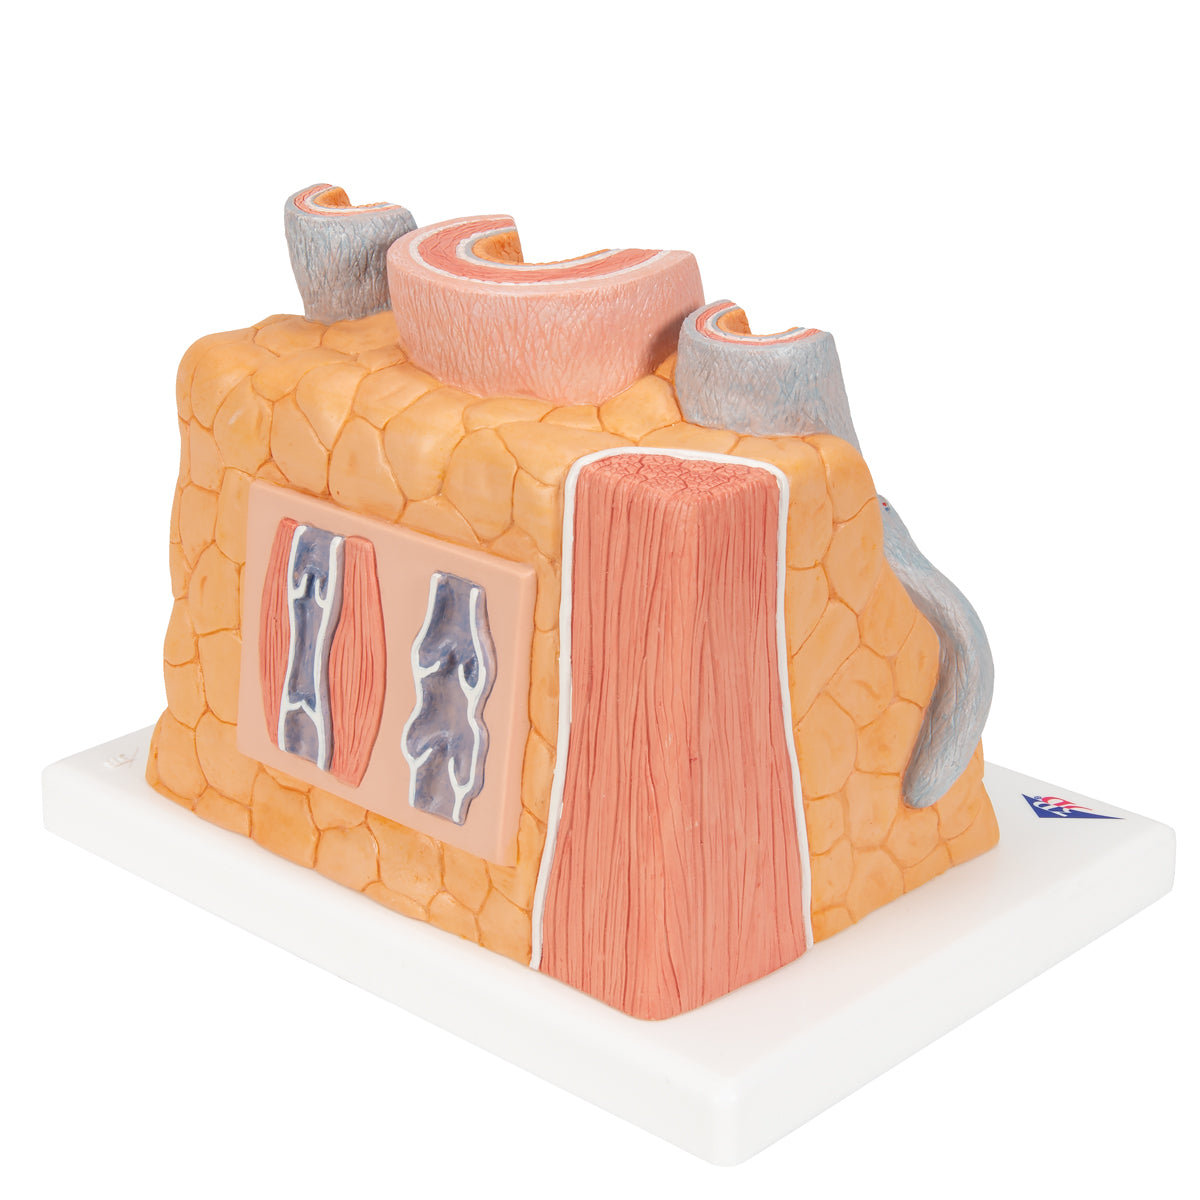 Detailed model of 1 artery and 2 veins which is greatly enlarged